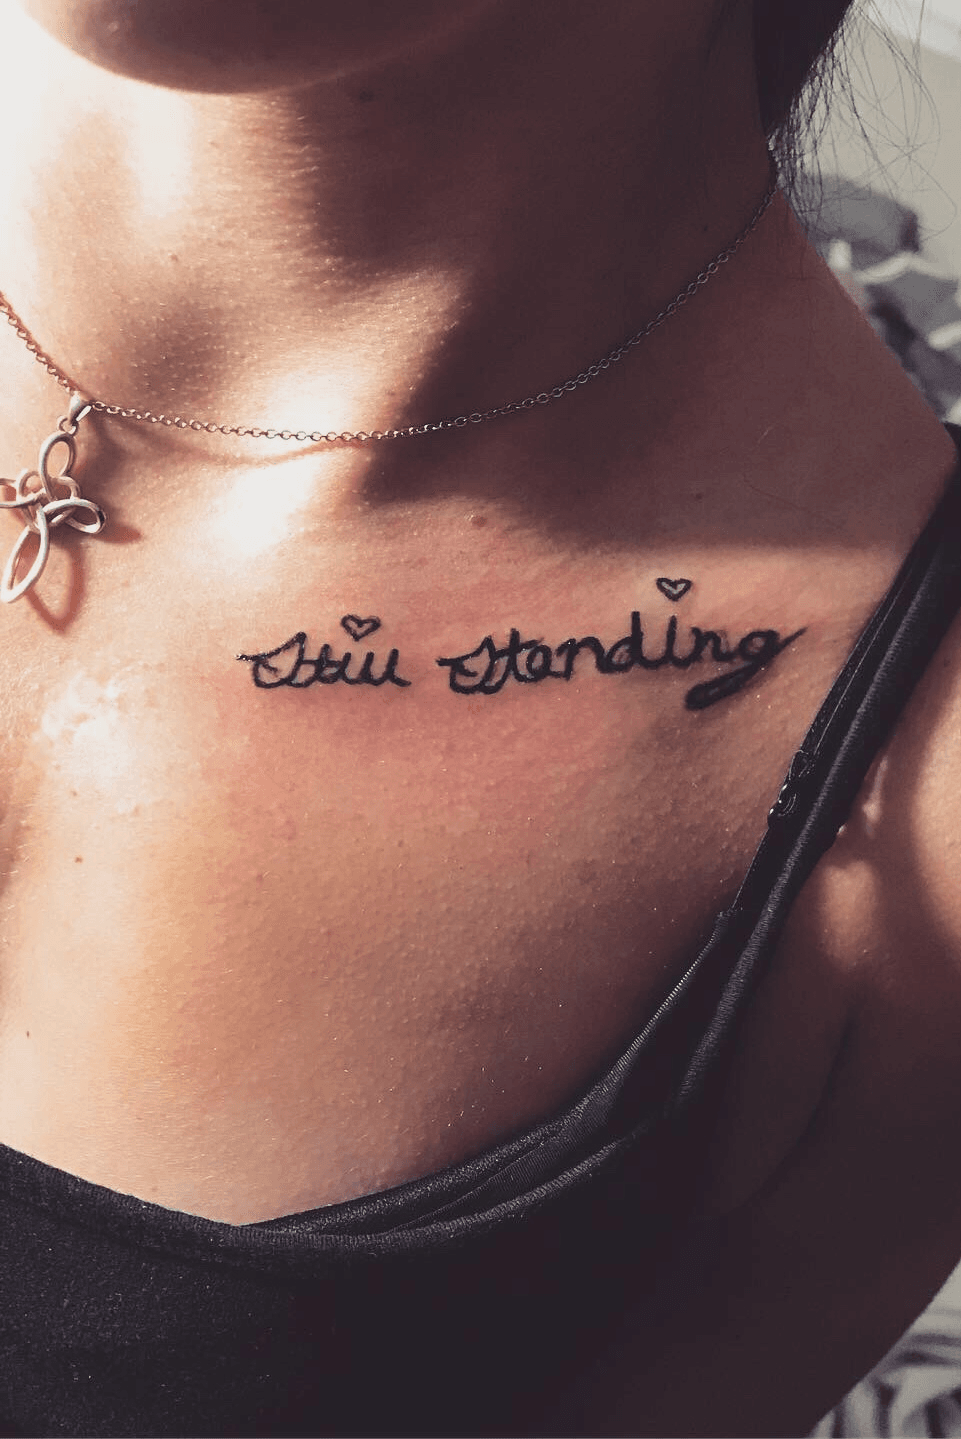 still standing  Tattoo quotes Tattoos and piercings Tattoos